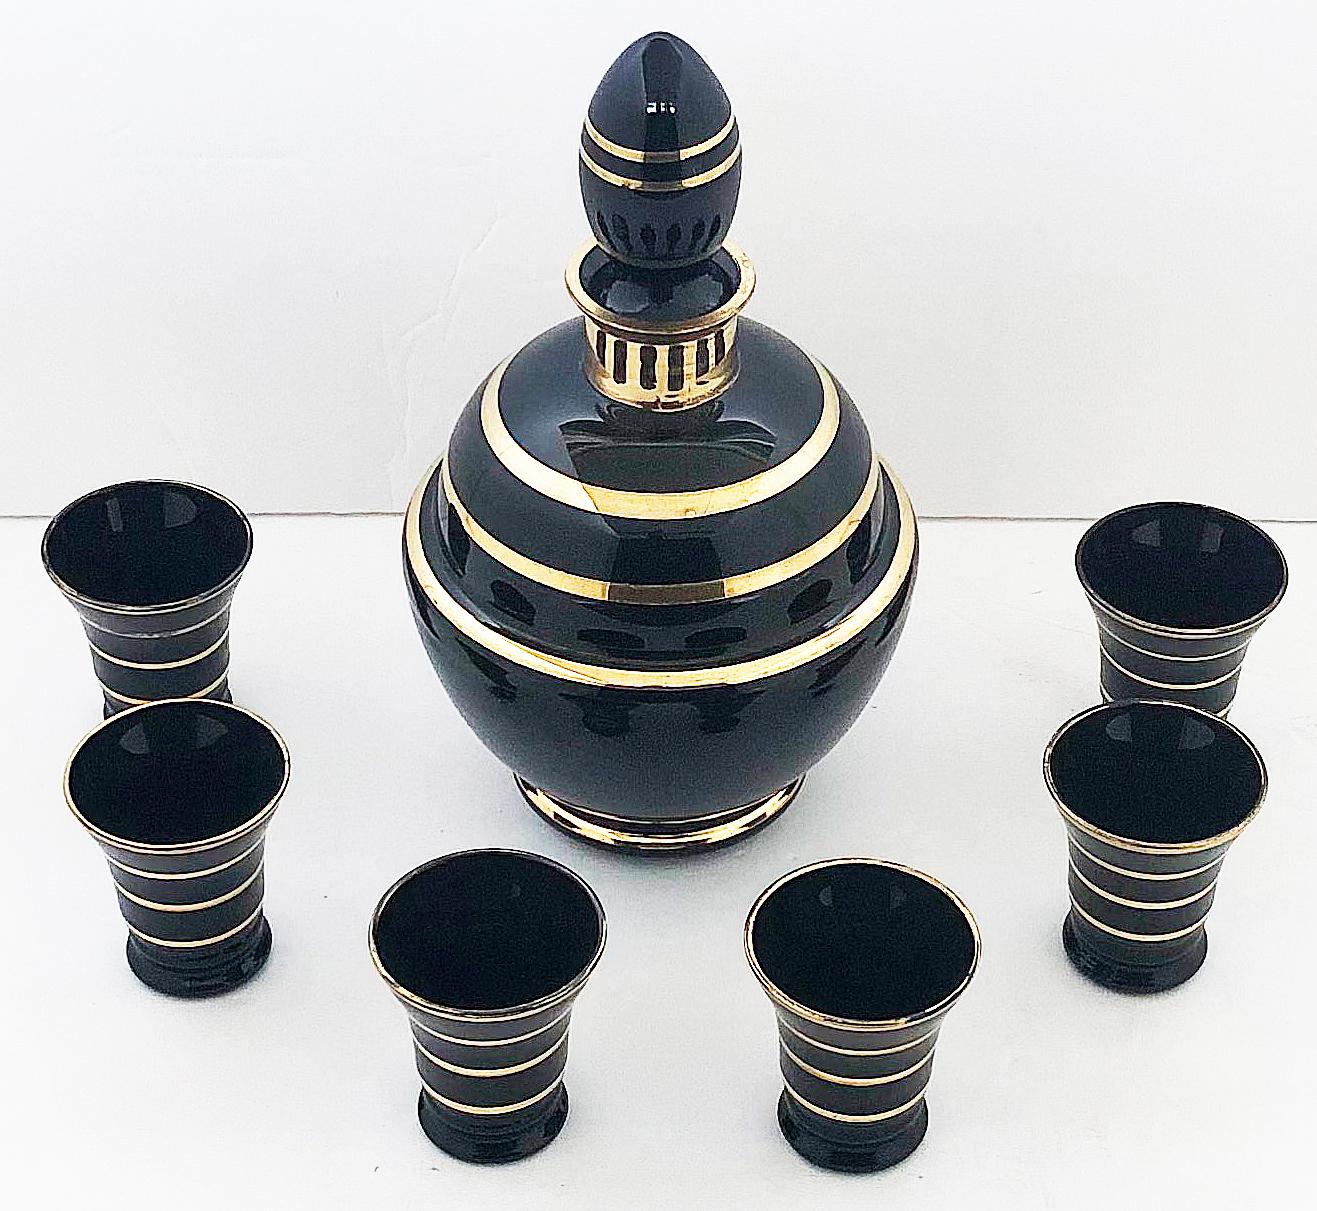 Gilt decorated black bristol glass cordial decanter / glasses, set of 7

Offered for sale is a gilt decorated opaque black Bristol glass cordial decanter set with a decanter, stopper, and six cordial glasses. 

Cups measure 2.13